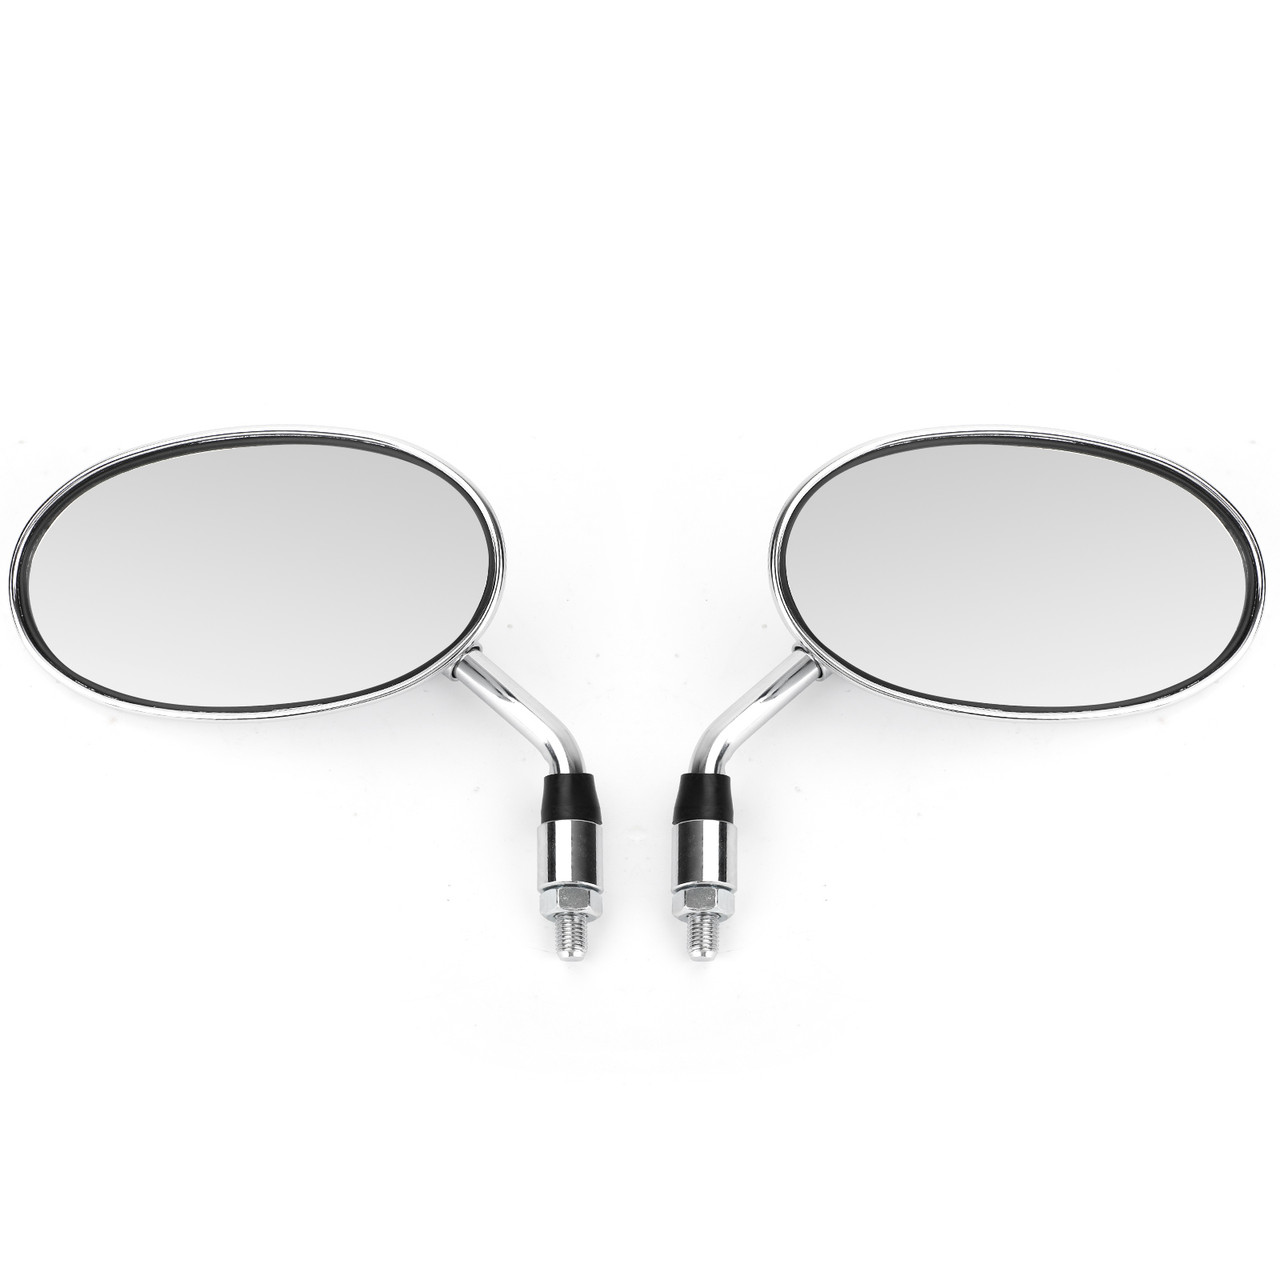 Motorcycle Rearview Side Mirrors Pair Fit for Honda NV400 Shadow 92-97 VT250 Magna 250 95-97  VT1100 Shadow 1100